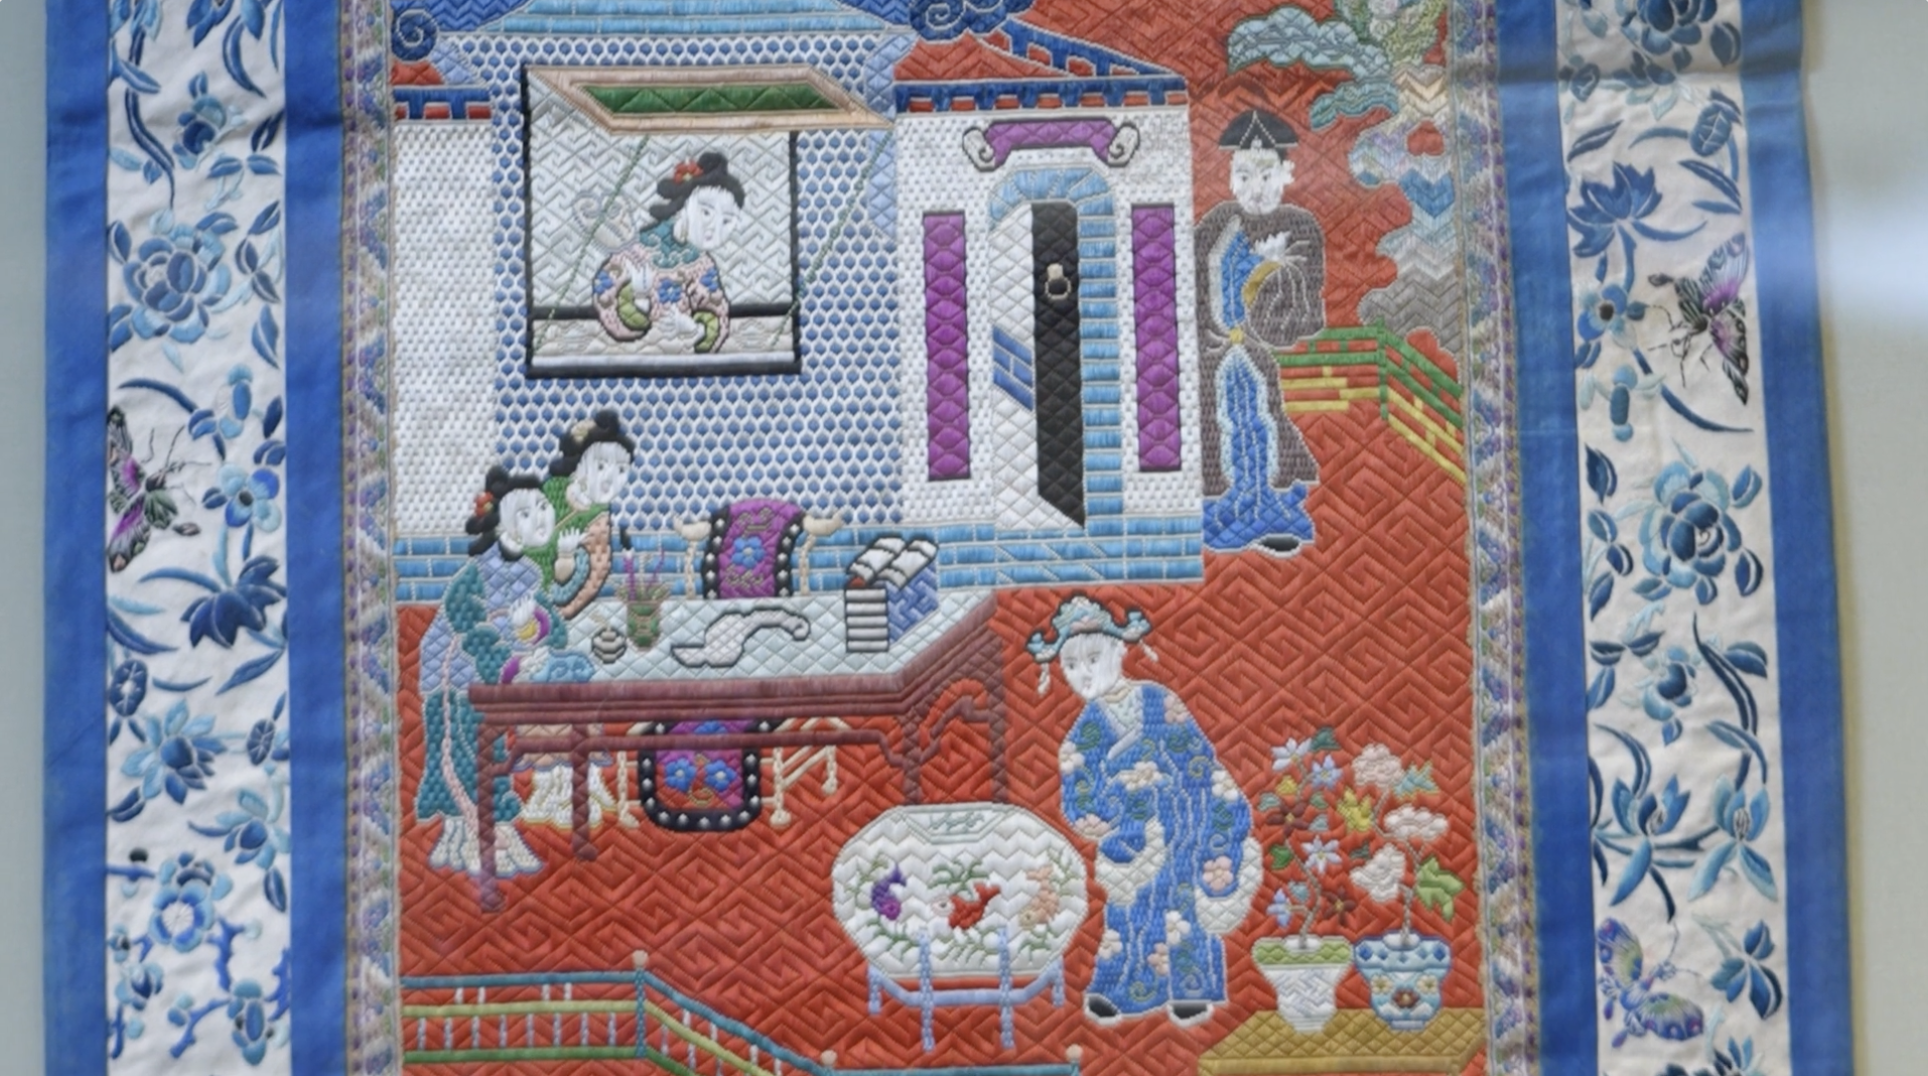 The counted-thread embroidery mirror curtain from the late Qing Dynasty to the Republic of China period illustrates the folklore 